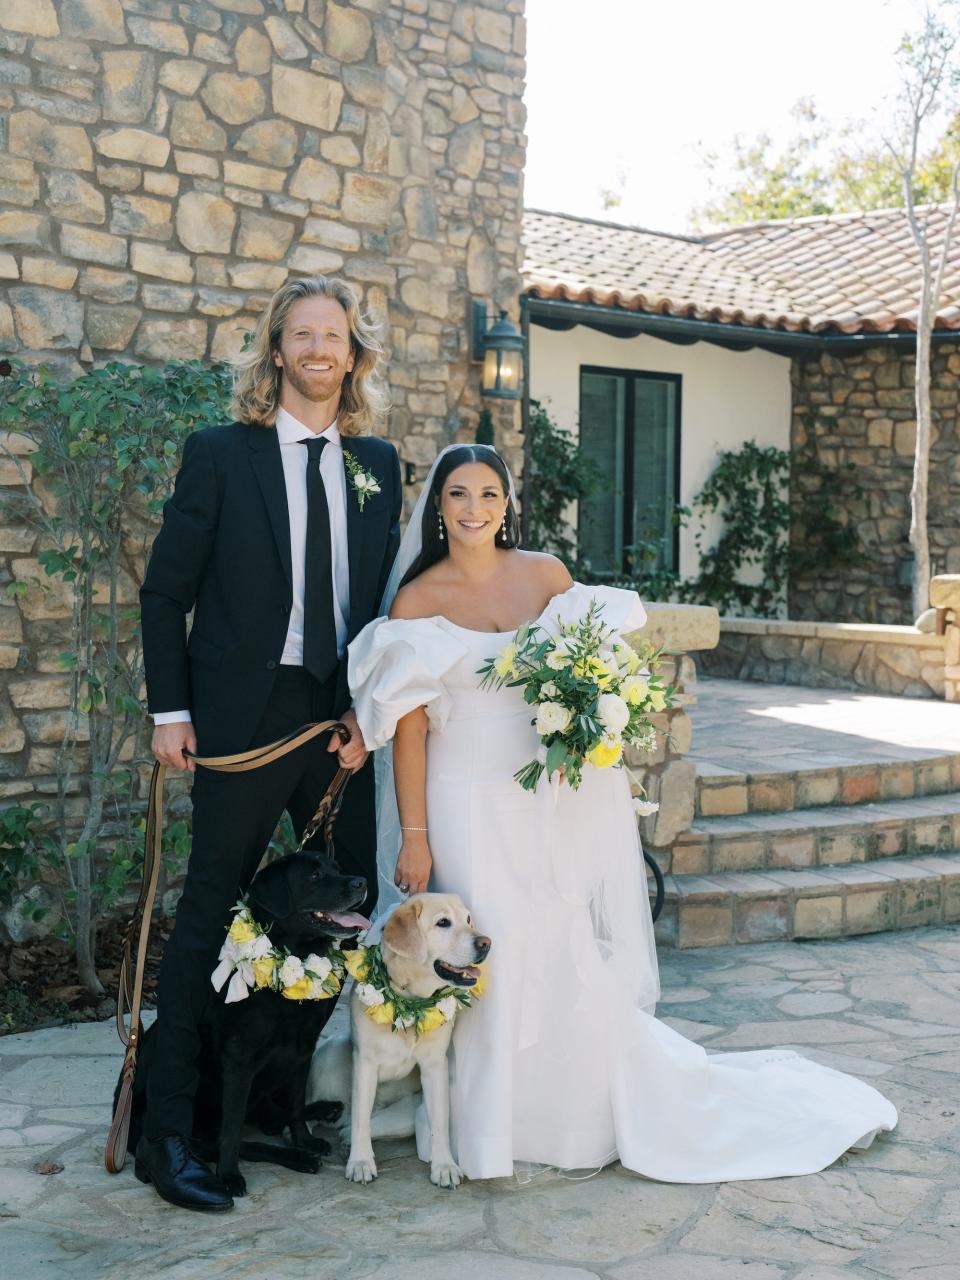 A bride and groom pose with a black dog and a yellow dog on their wedding day.